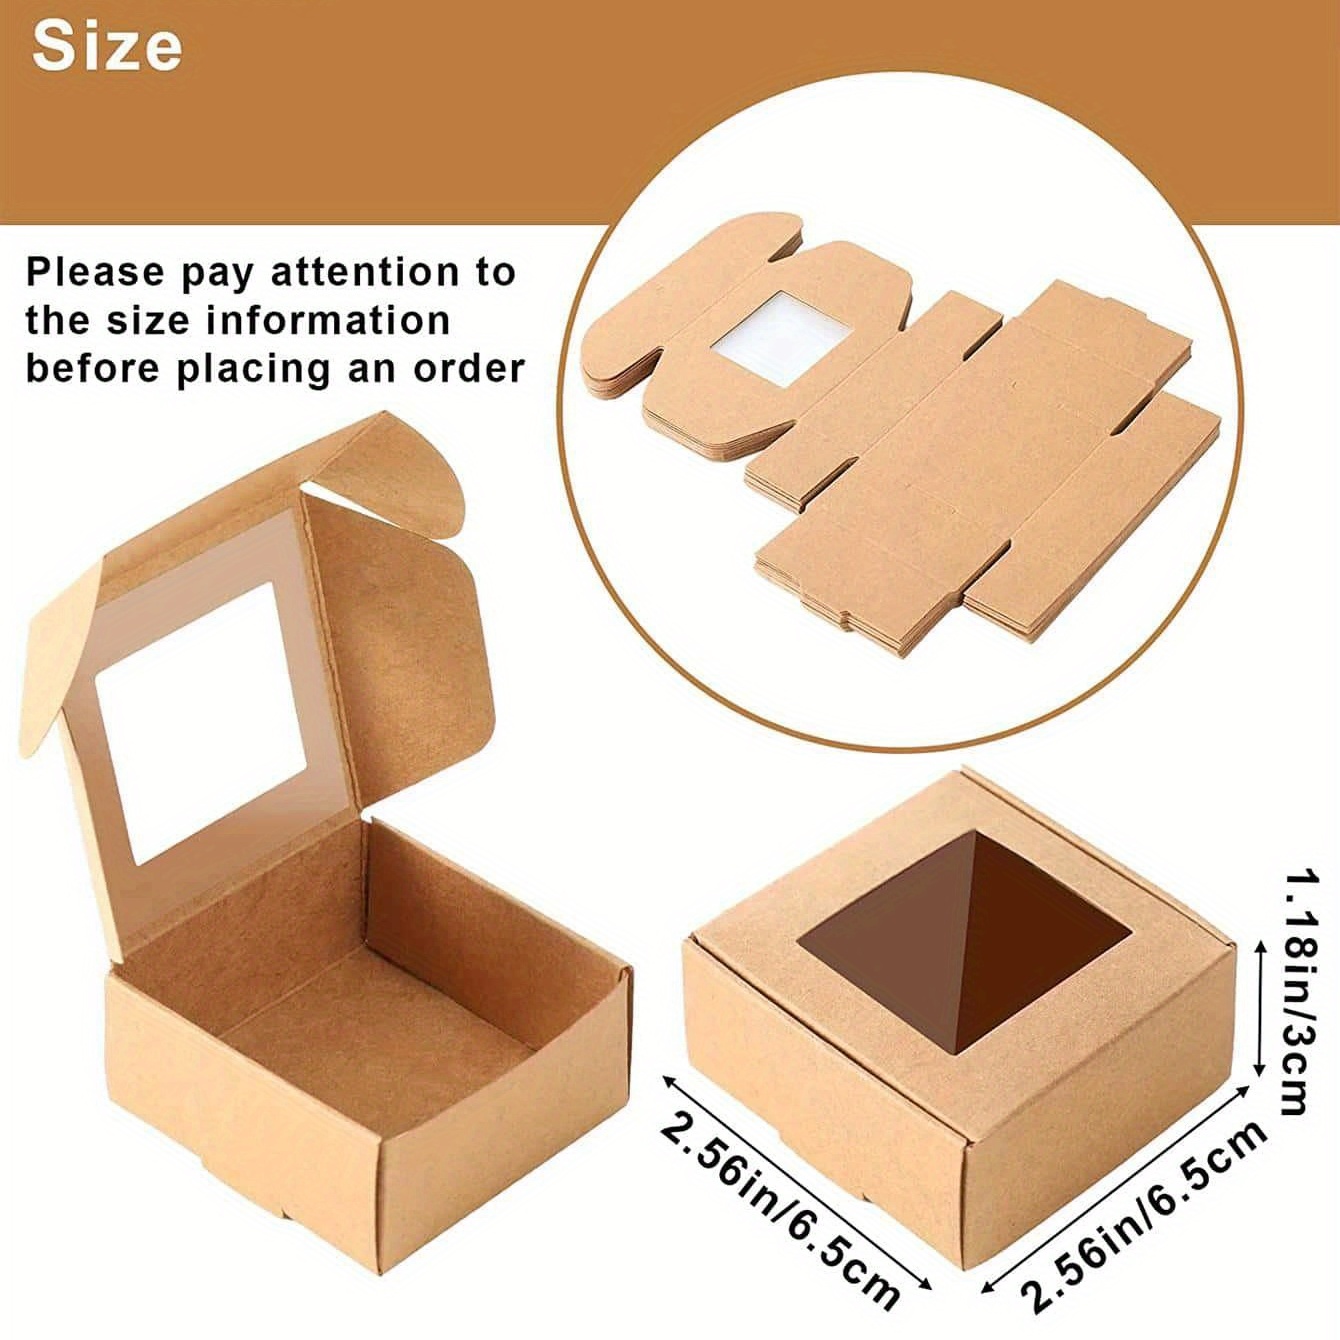 HOW TO MAKE DIY BOX FOR SMALL BUSINESS, packing orders